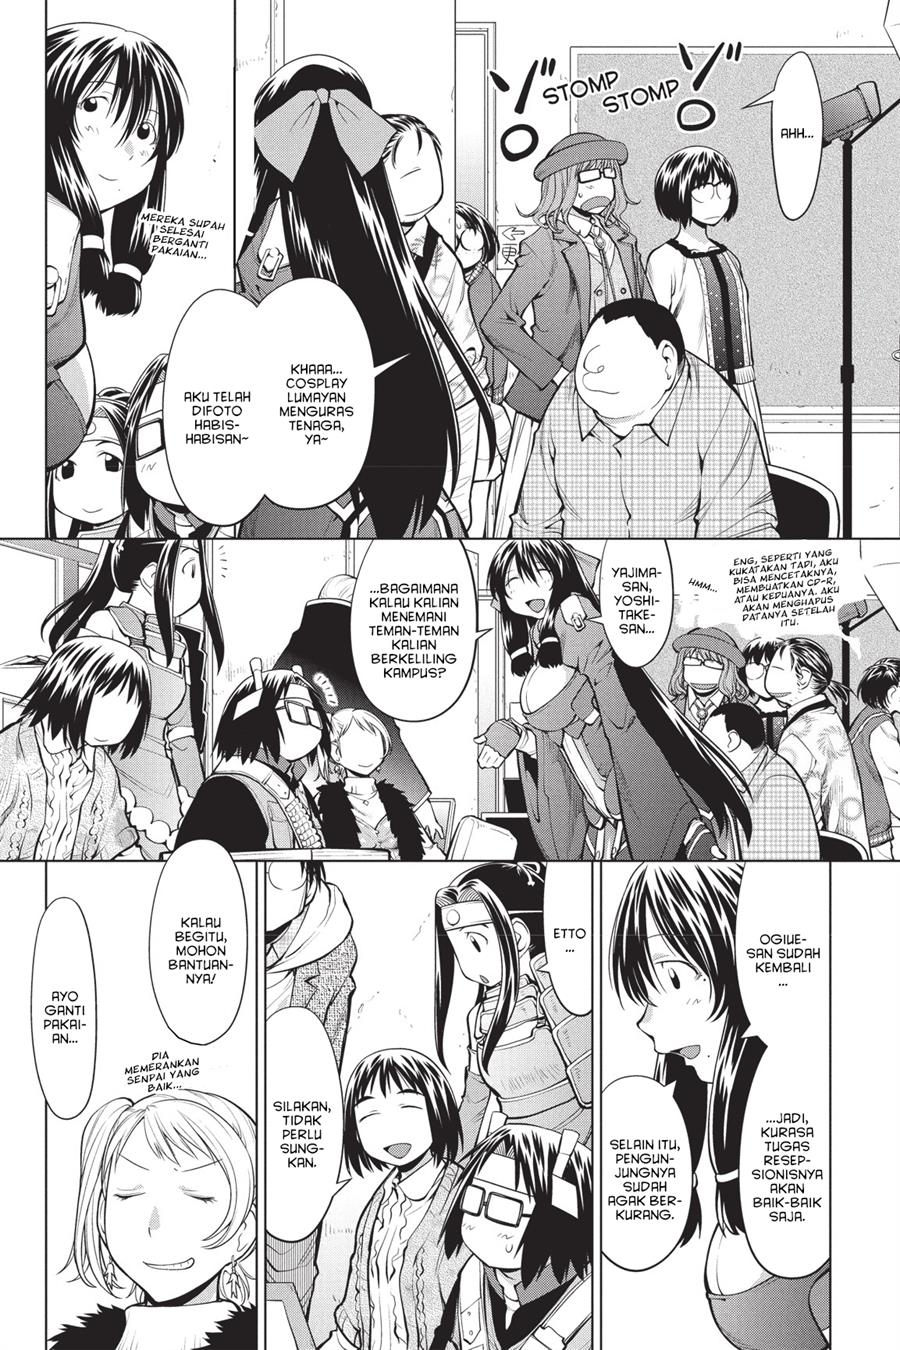 Genshiken – The Society for the Study of Modern Visual Culture Chapter 78 Image 4